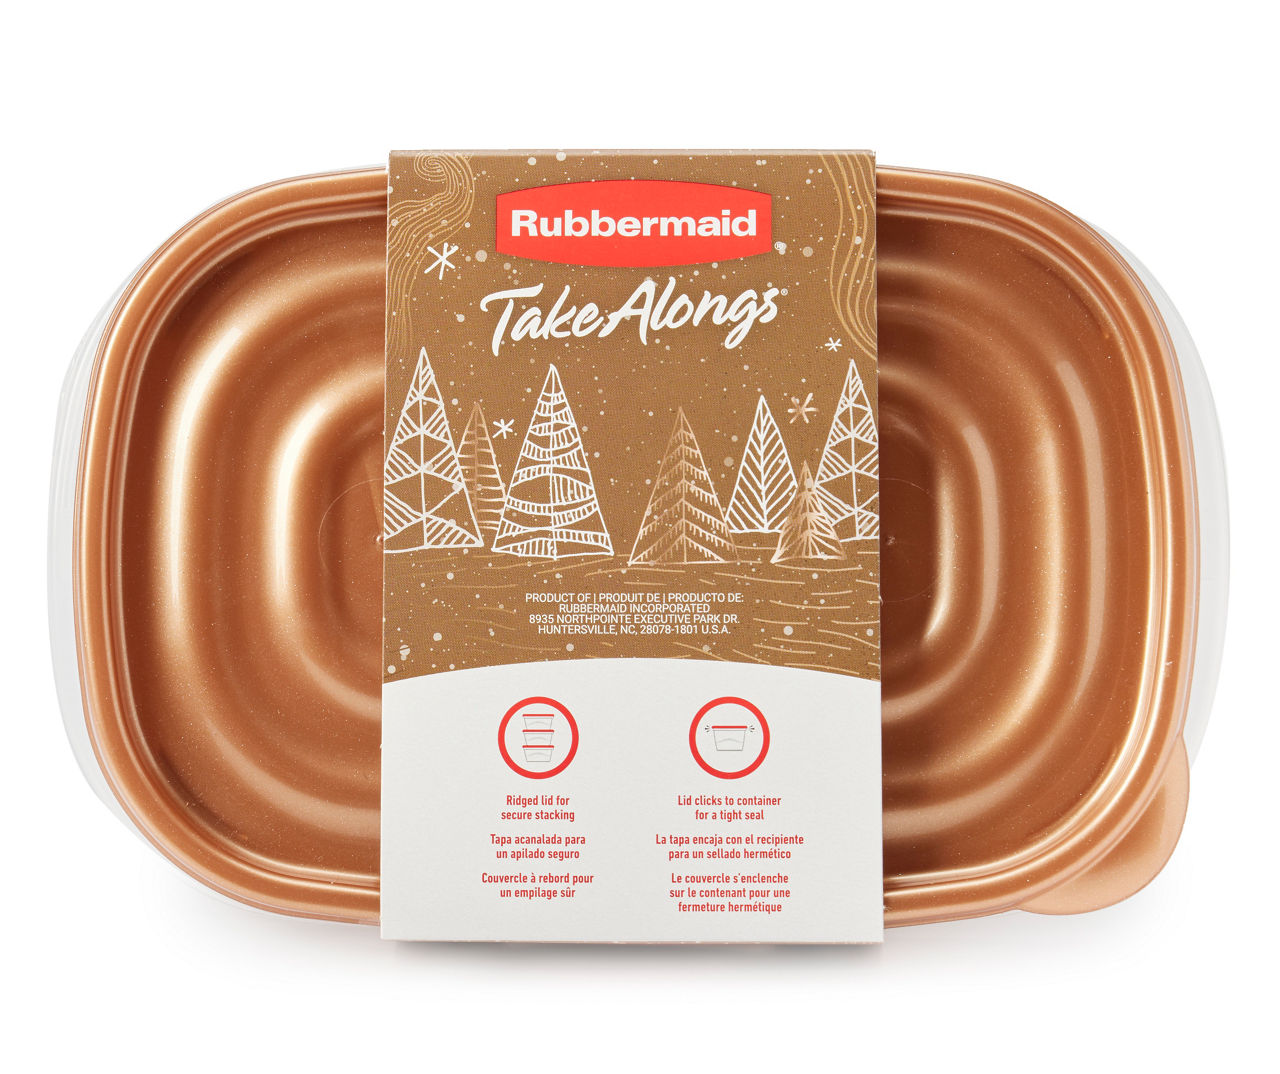 Rubbermaid Take Alongs Containers Trays & Lids